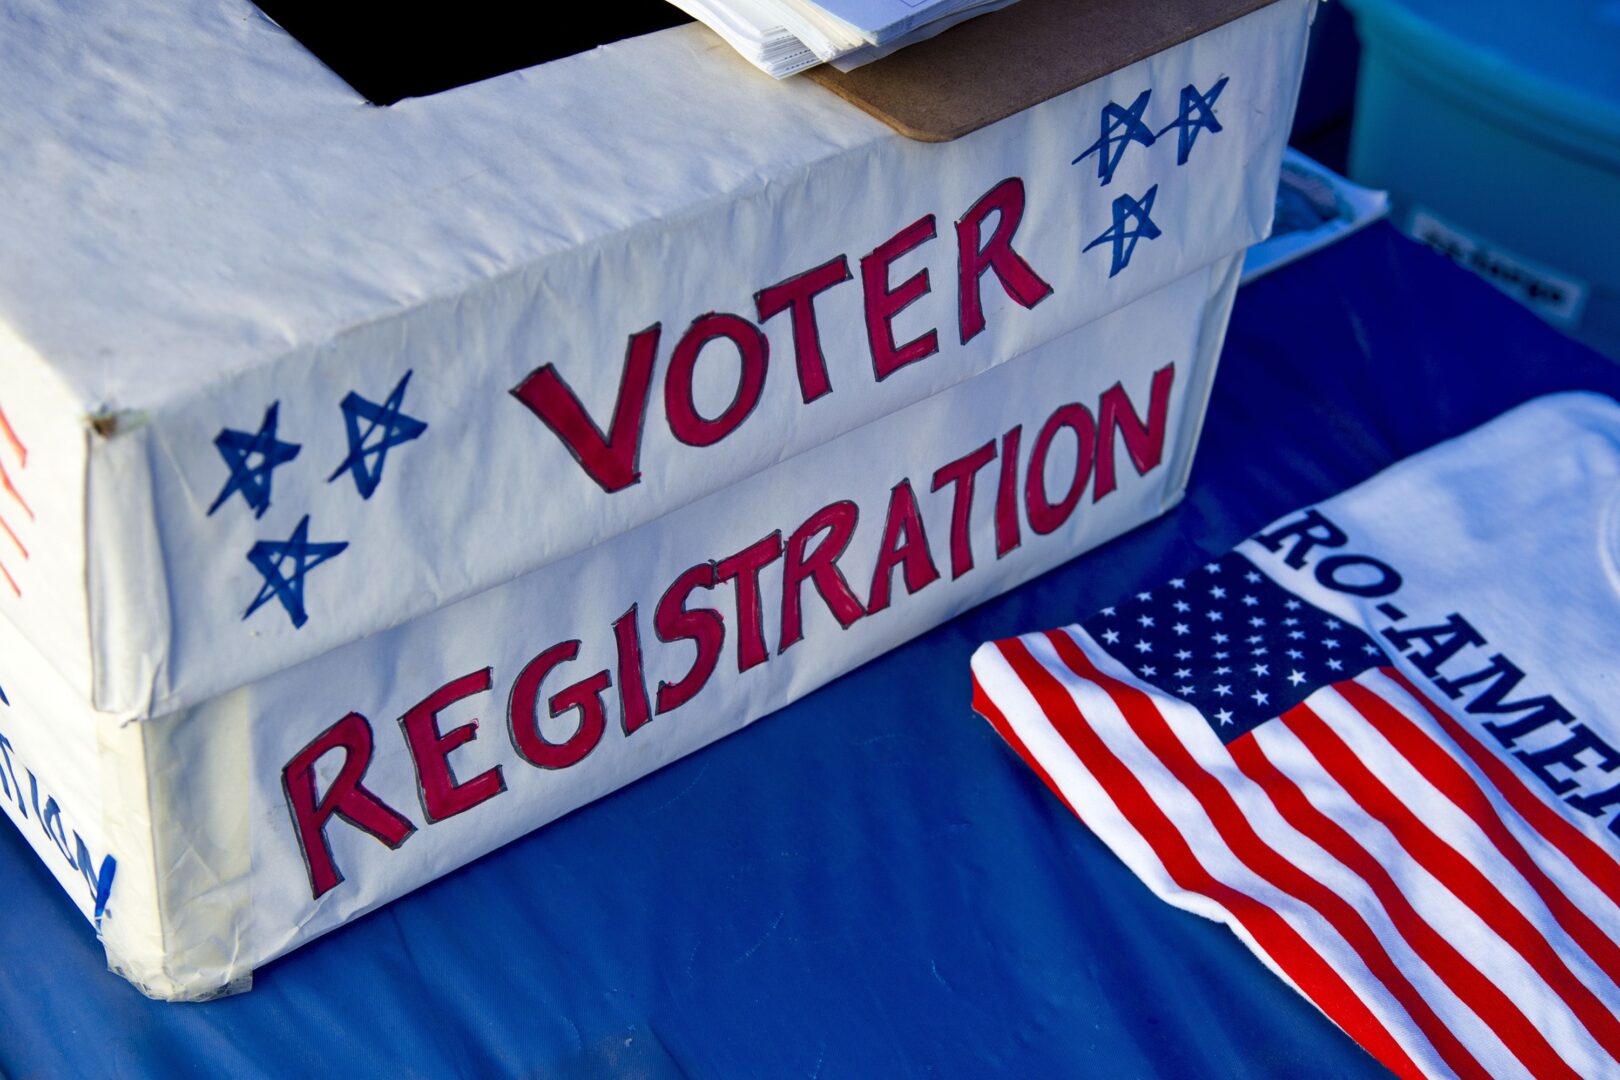 The order expands on an existing federal law that requires certain state agencies, including the departments of Health and Human Services, to provide clients the opportunity to register to vote.